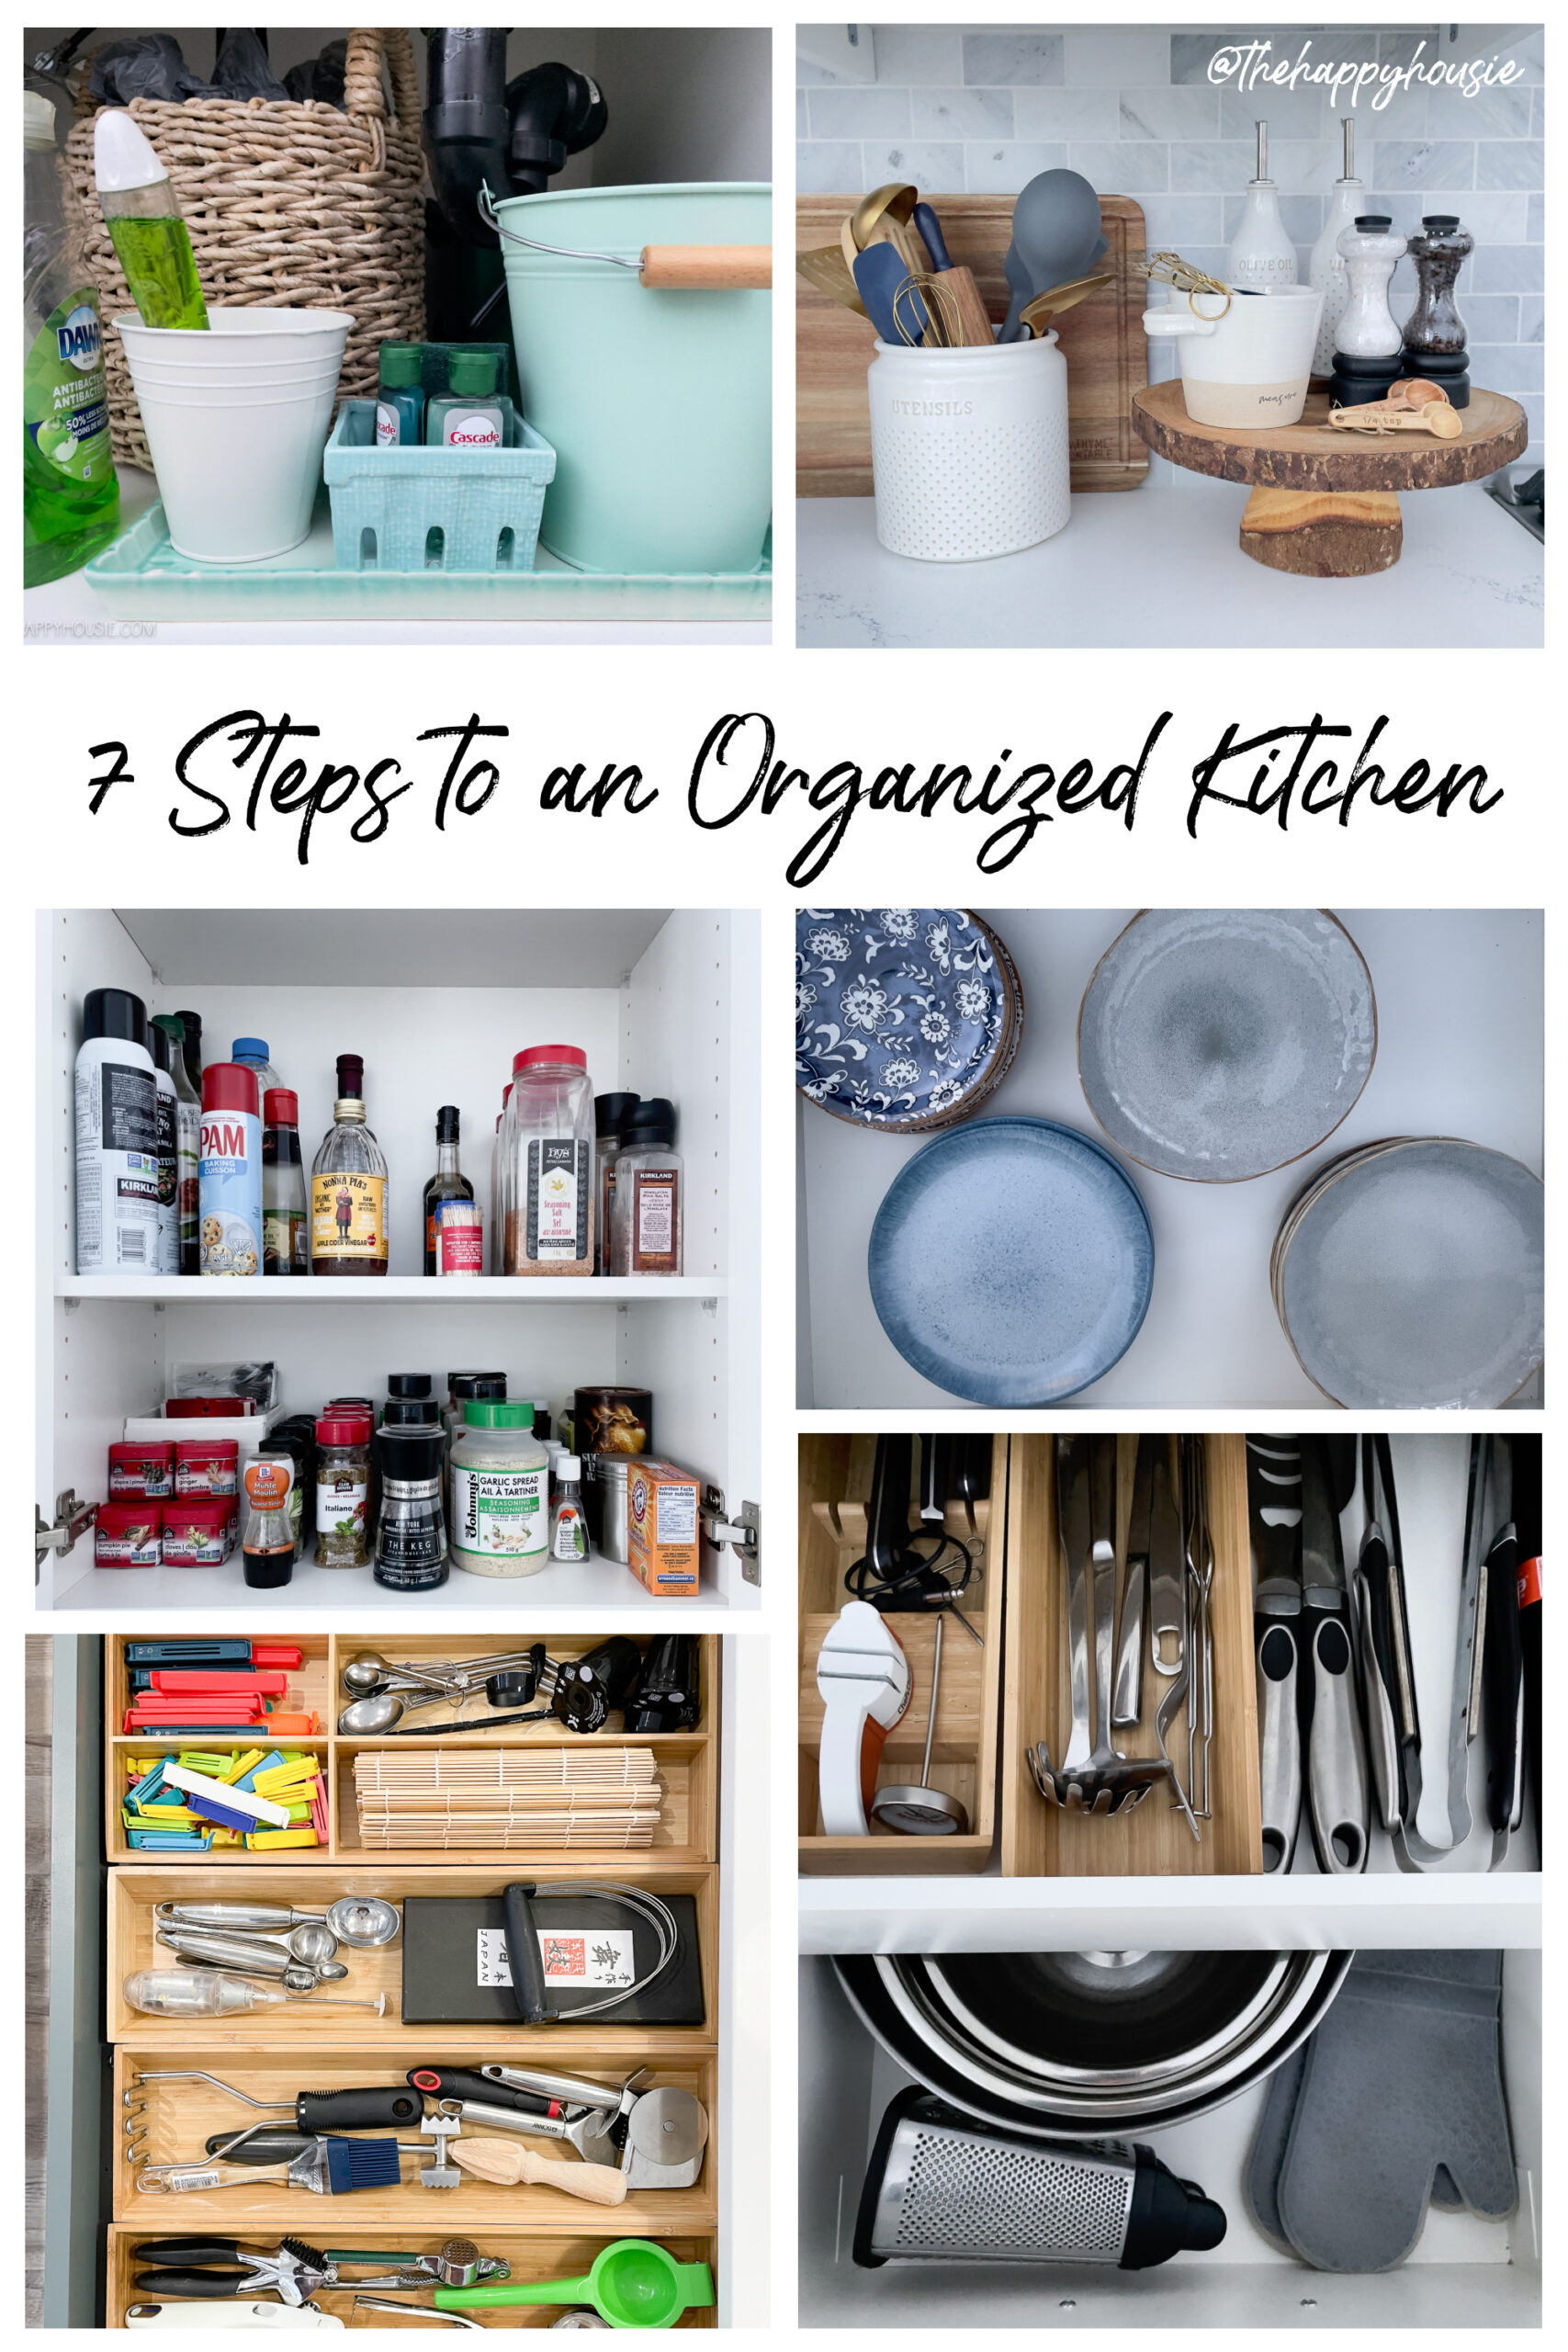 Clever Ways to Organize Your Kitchen